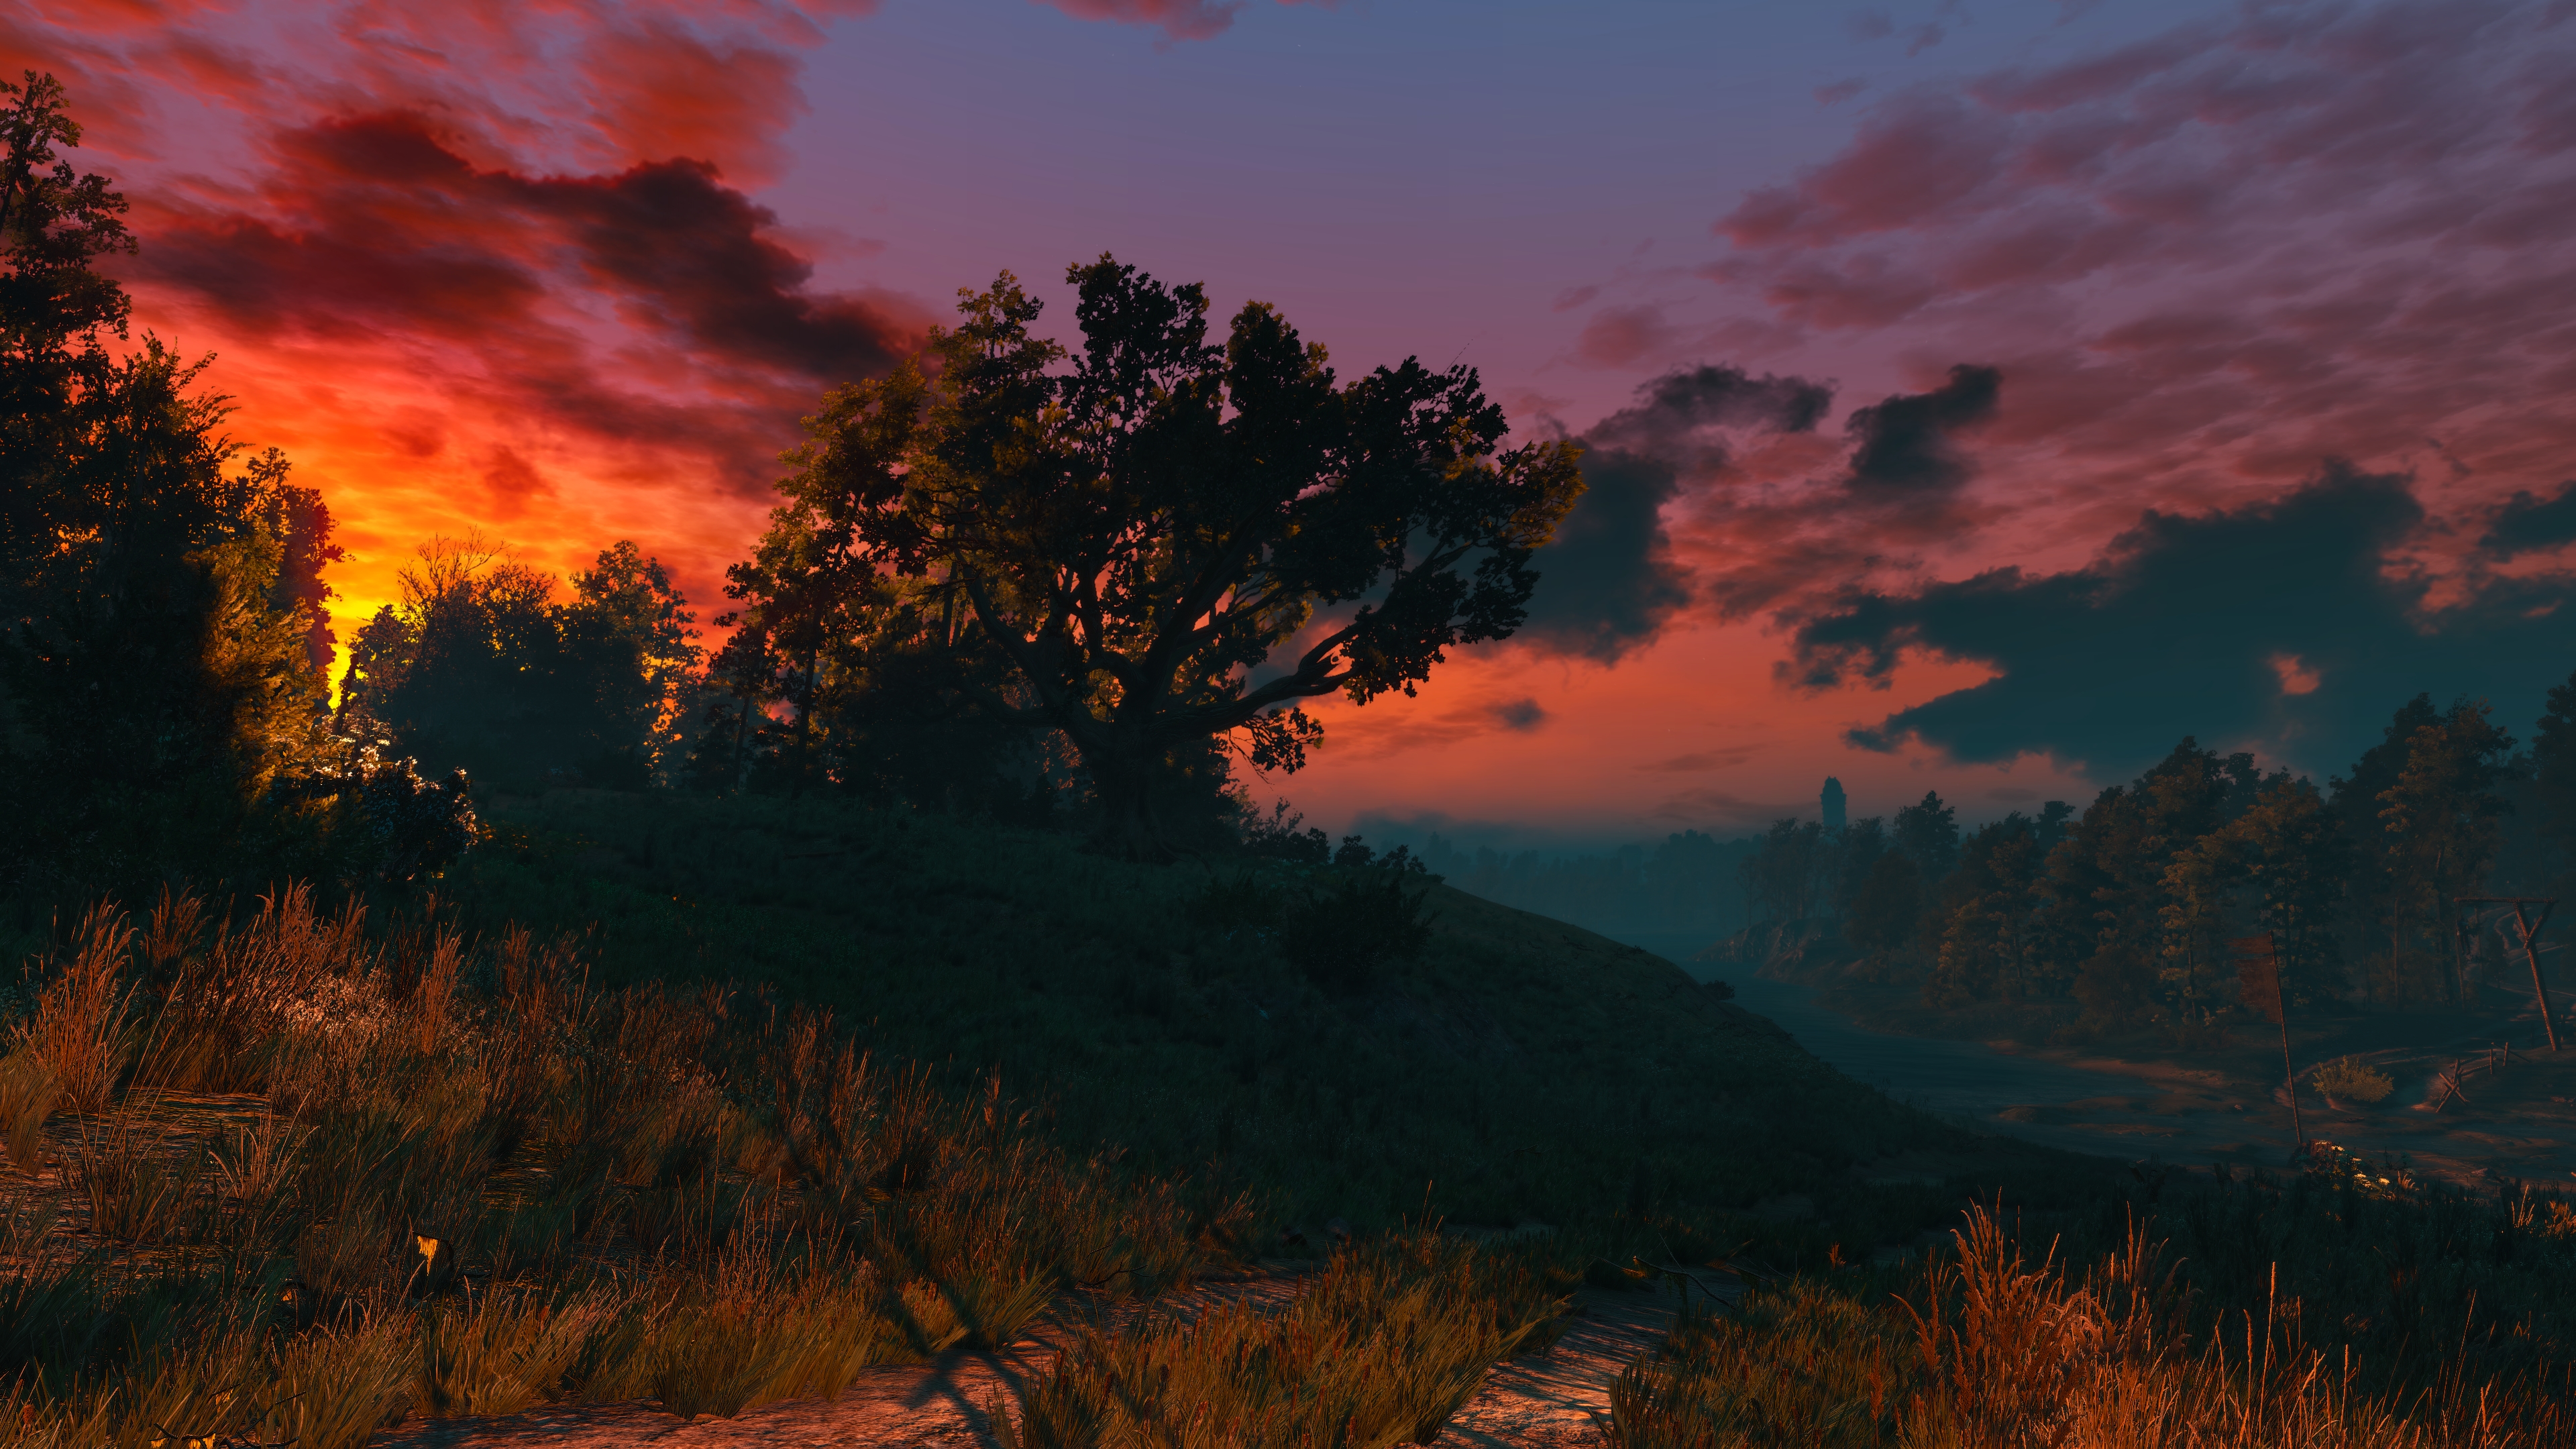 General 3840x2160 The Witcher 3: Wild Hunt screen shot sunset video game art clouds video games nature sunset glow sunlight trees sky CGI path